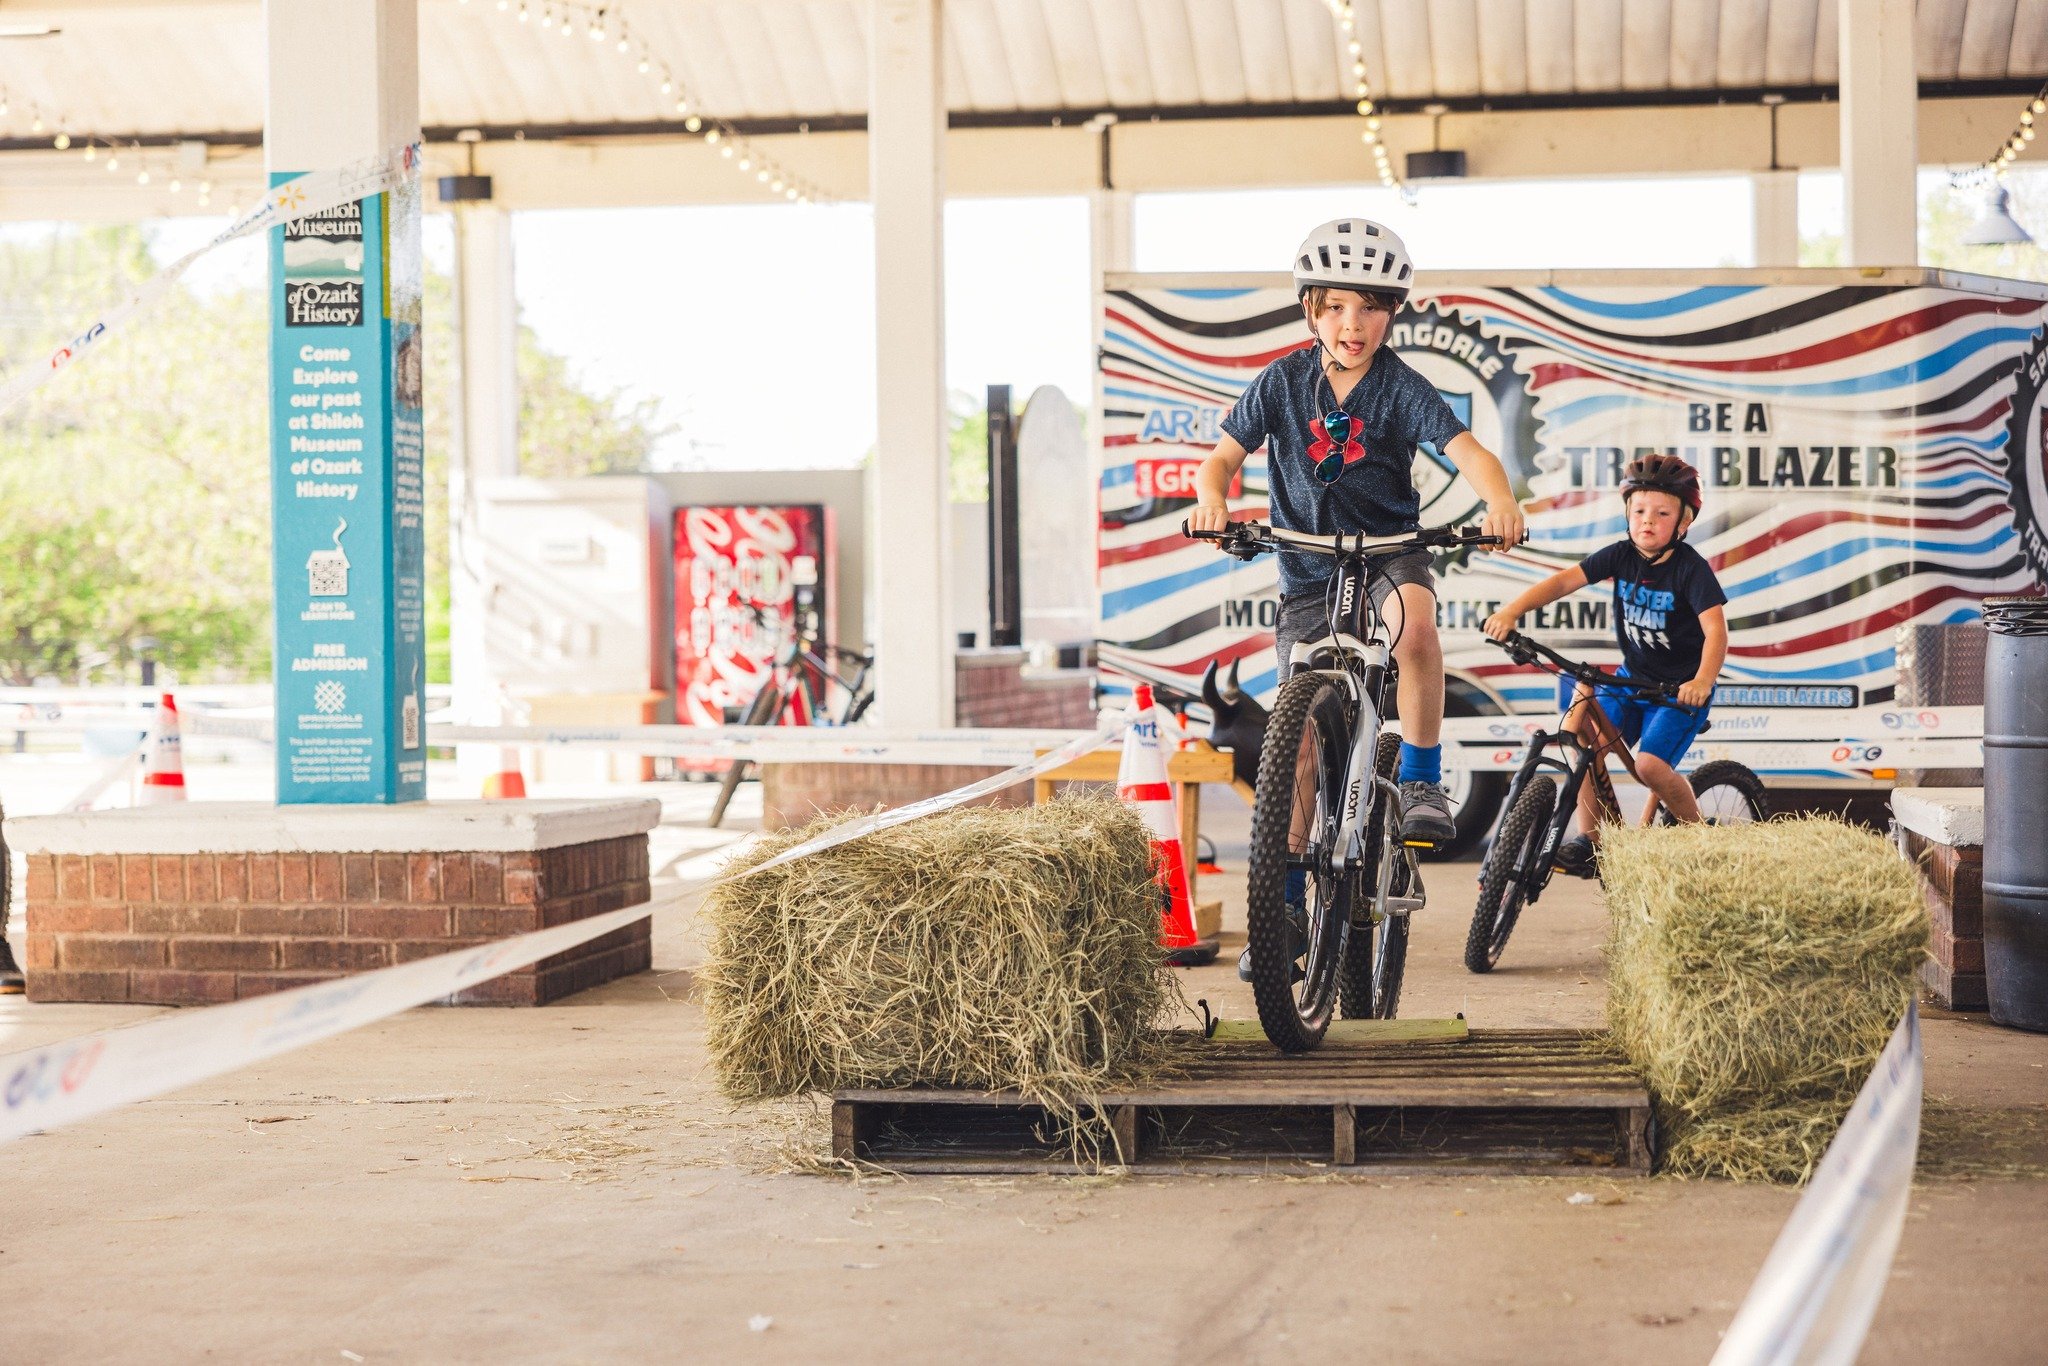 Join us at Shiloh Square for Family Bike Night on May 15th. Bring your little adventurers and their bikes for an evening of fun at the obstacle course! After conquering the course, refuel at one of downtown's delicious restaurants. 

Special thanks t